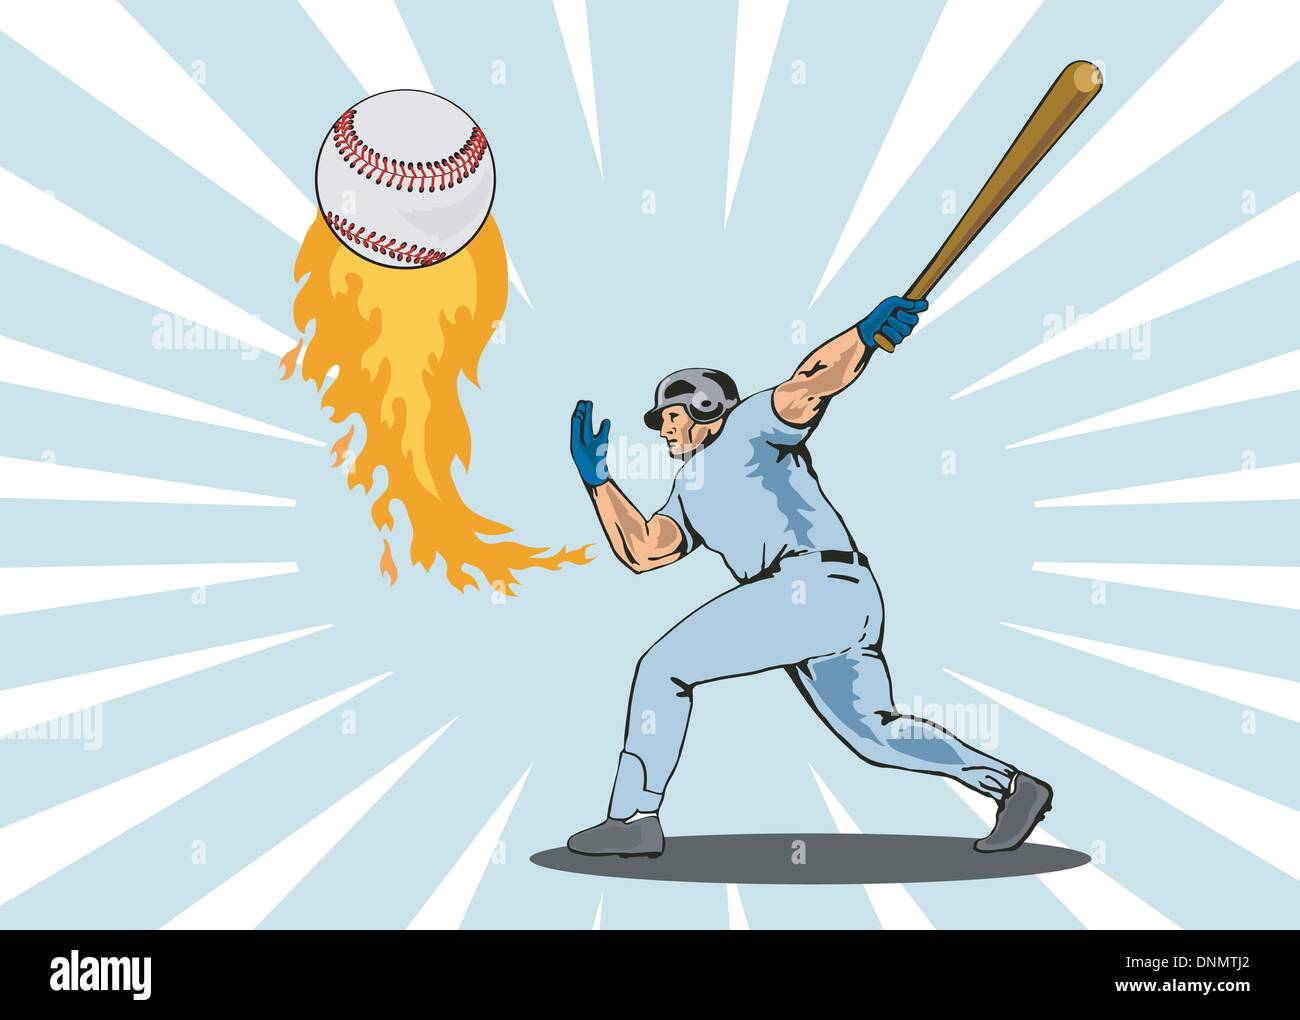 Illustration of a baseball player batter hitting a ball on fire done in retro style. Stock Vector